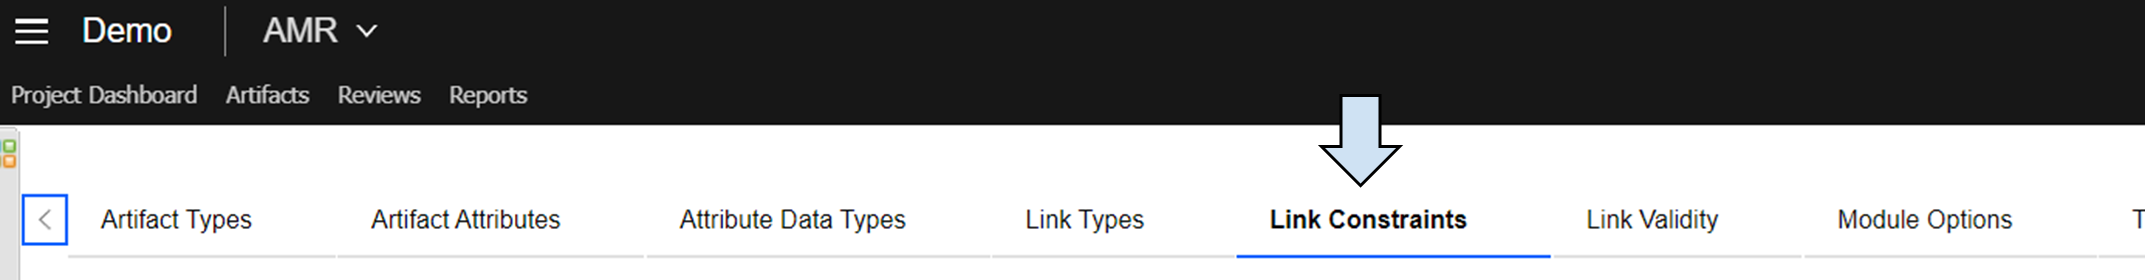 You will find Link constraints between Link Validity and Link Types 